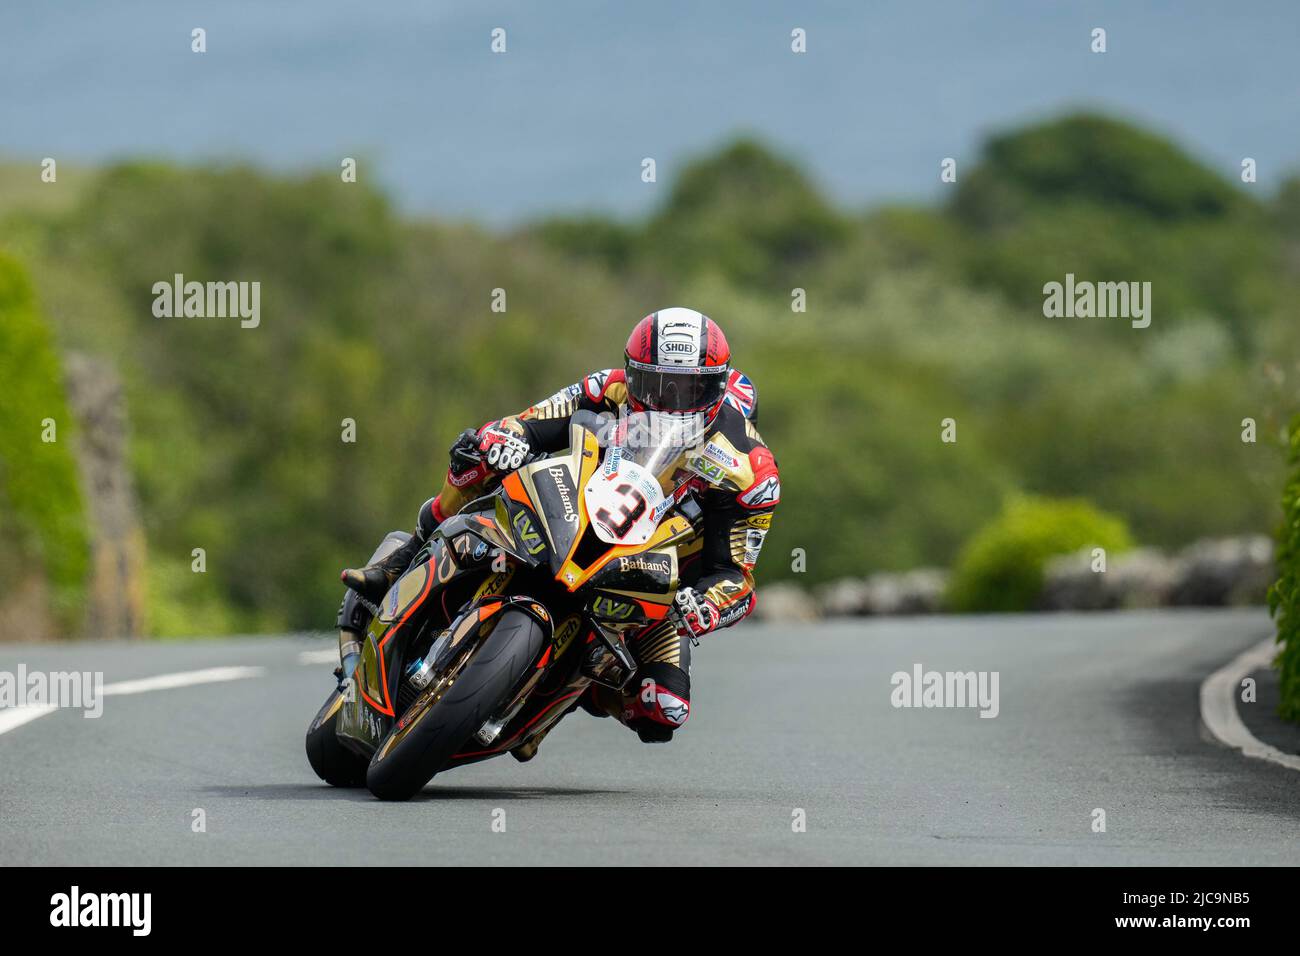 Douglas, Isle Of Man. 11th June, 2022. Michael Rutter (1000 BMW) representing the Bathams Ales team during the 2022 Milwaukee Senior TT at the Isle of Man, Douglas, Isle of Man on the 11 June 2022. Photo by David Horn. Credit: PRiME Media Images/Alamy Live News Stock Photo